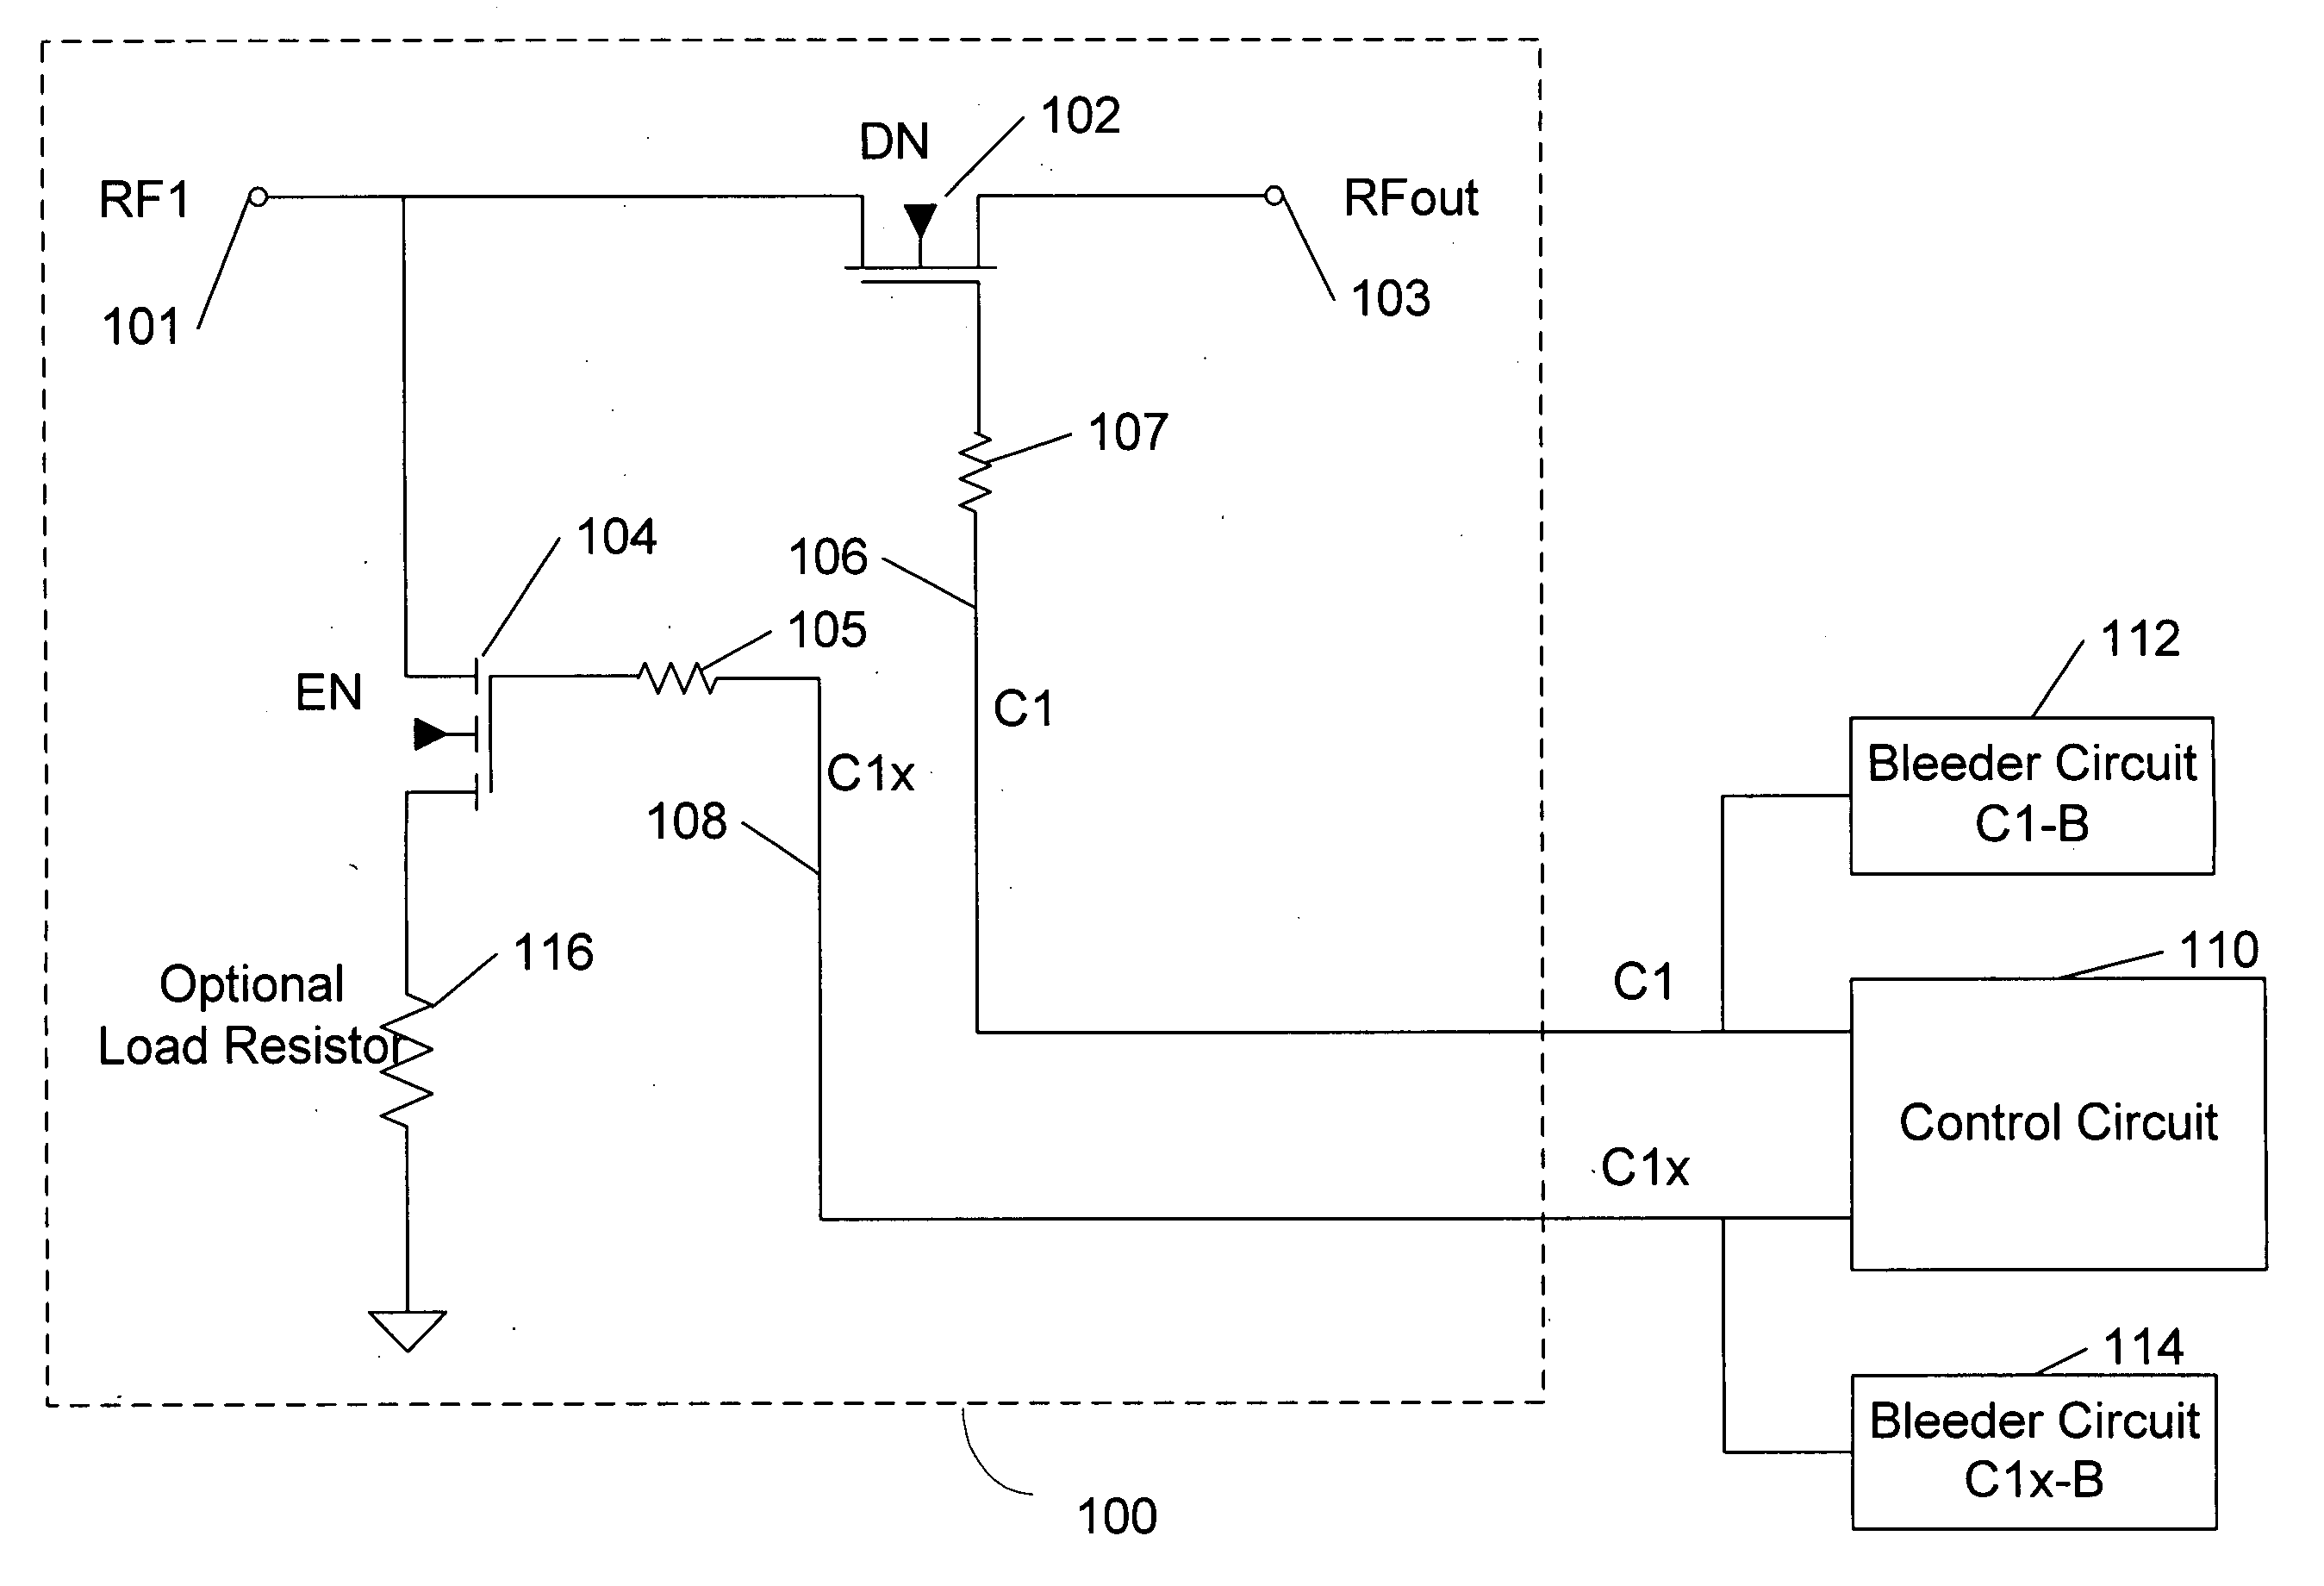 Unpowered switch and bleeder circuit